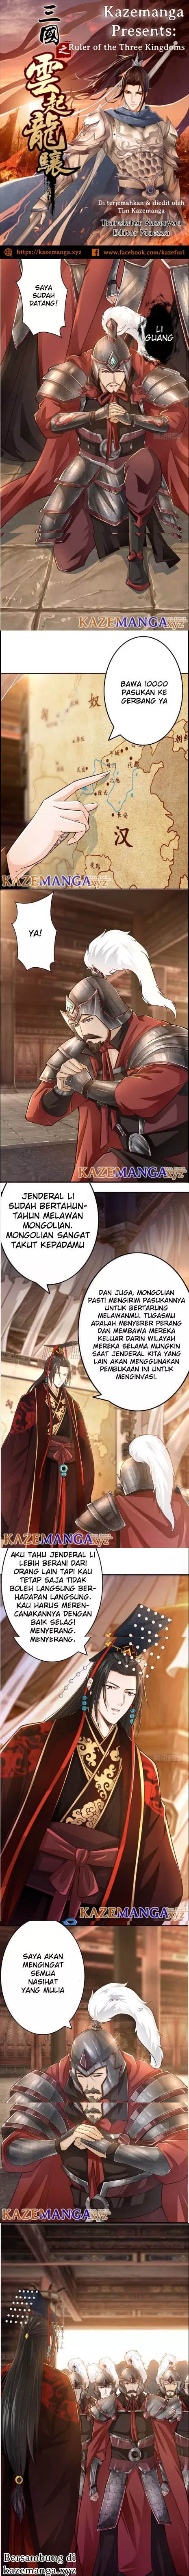 Ruler of the Three Kingdoms Chapter 01.3